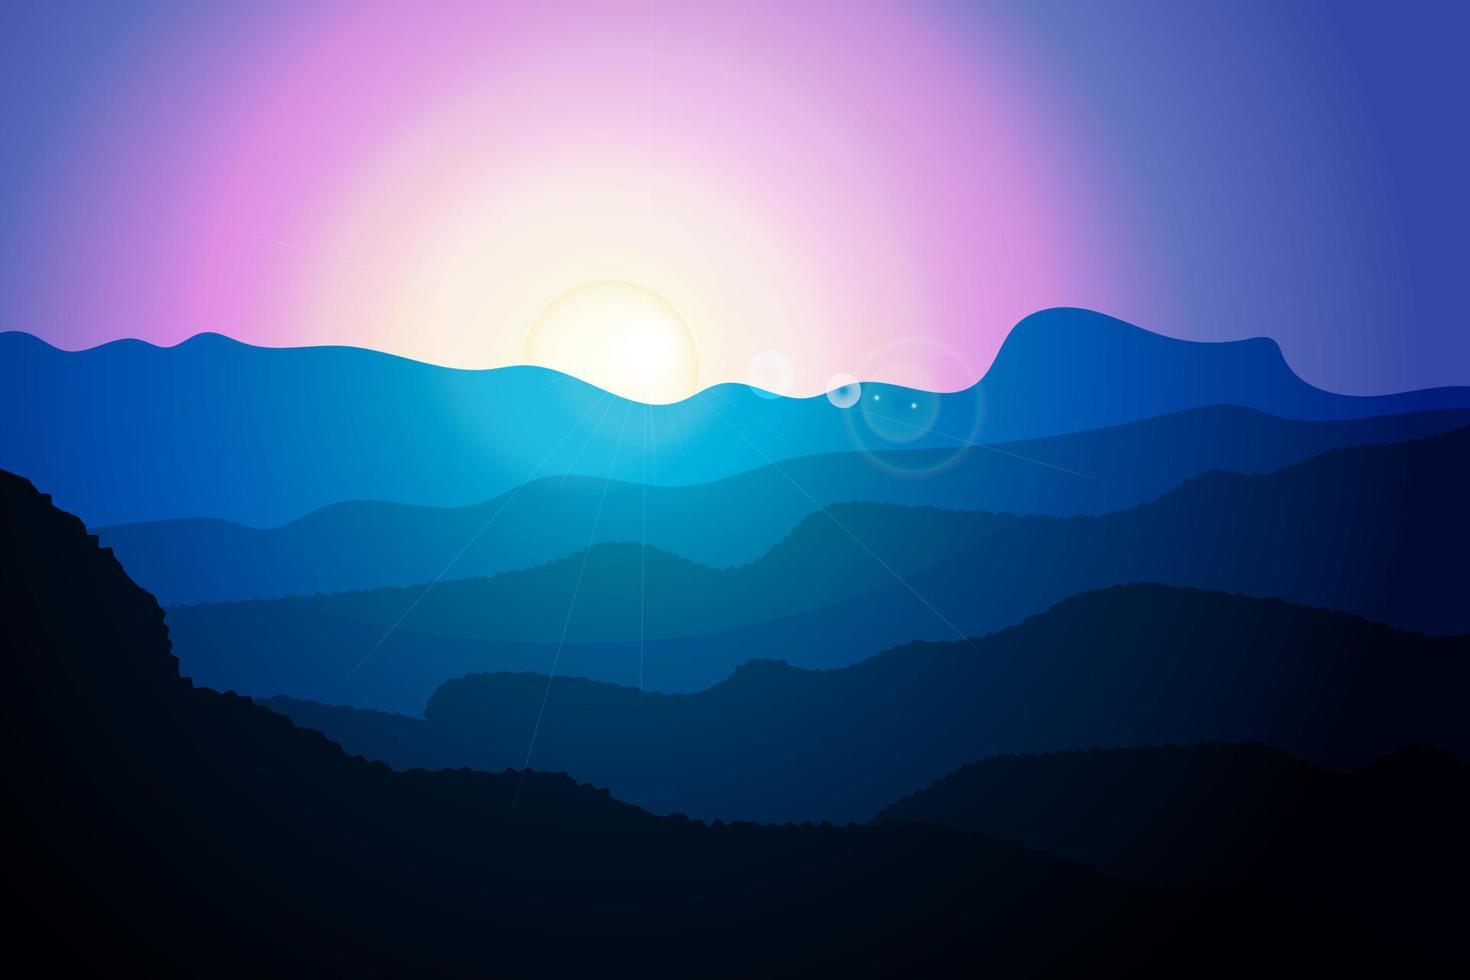 Dawn in the clear sky over the hills. Vector illustration. Landscape